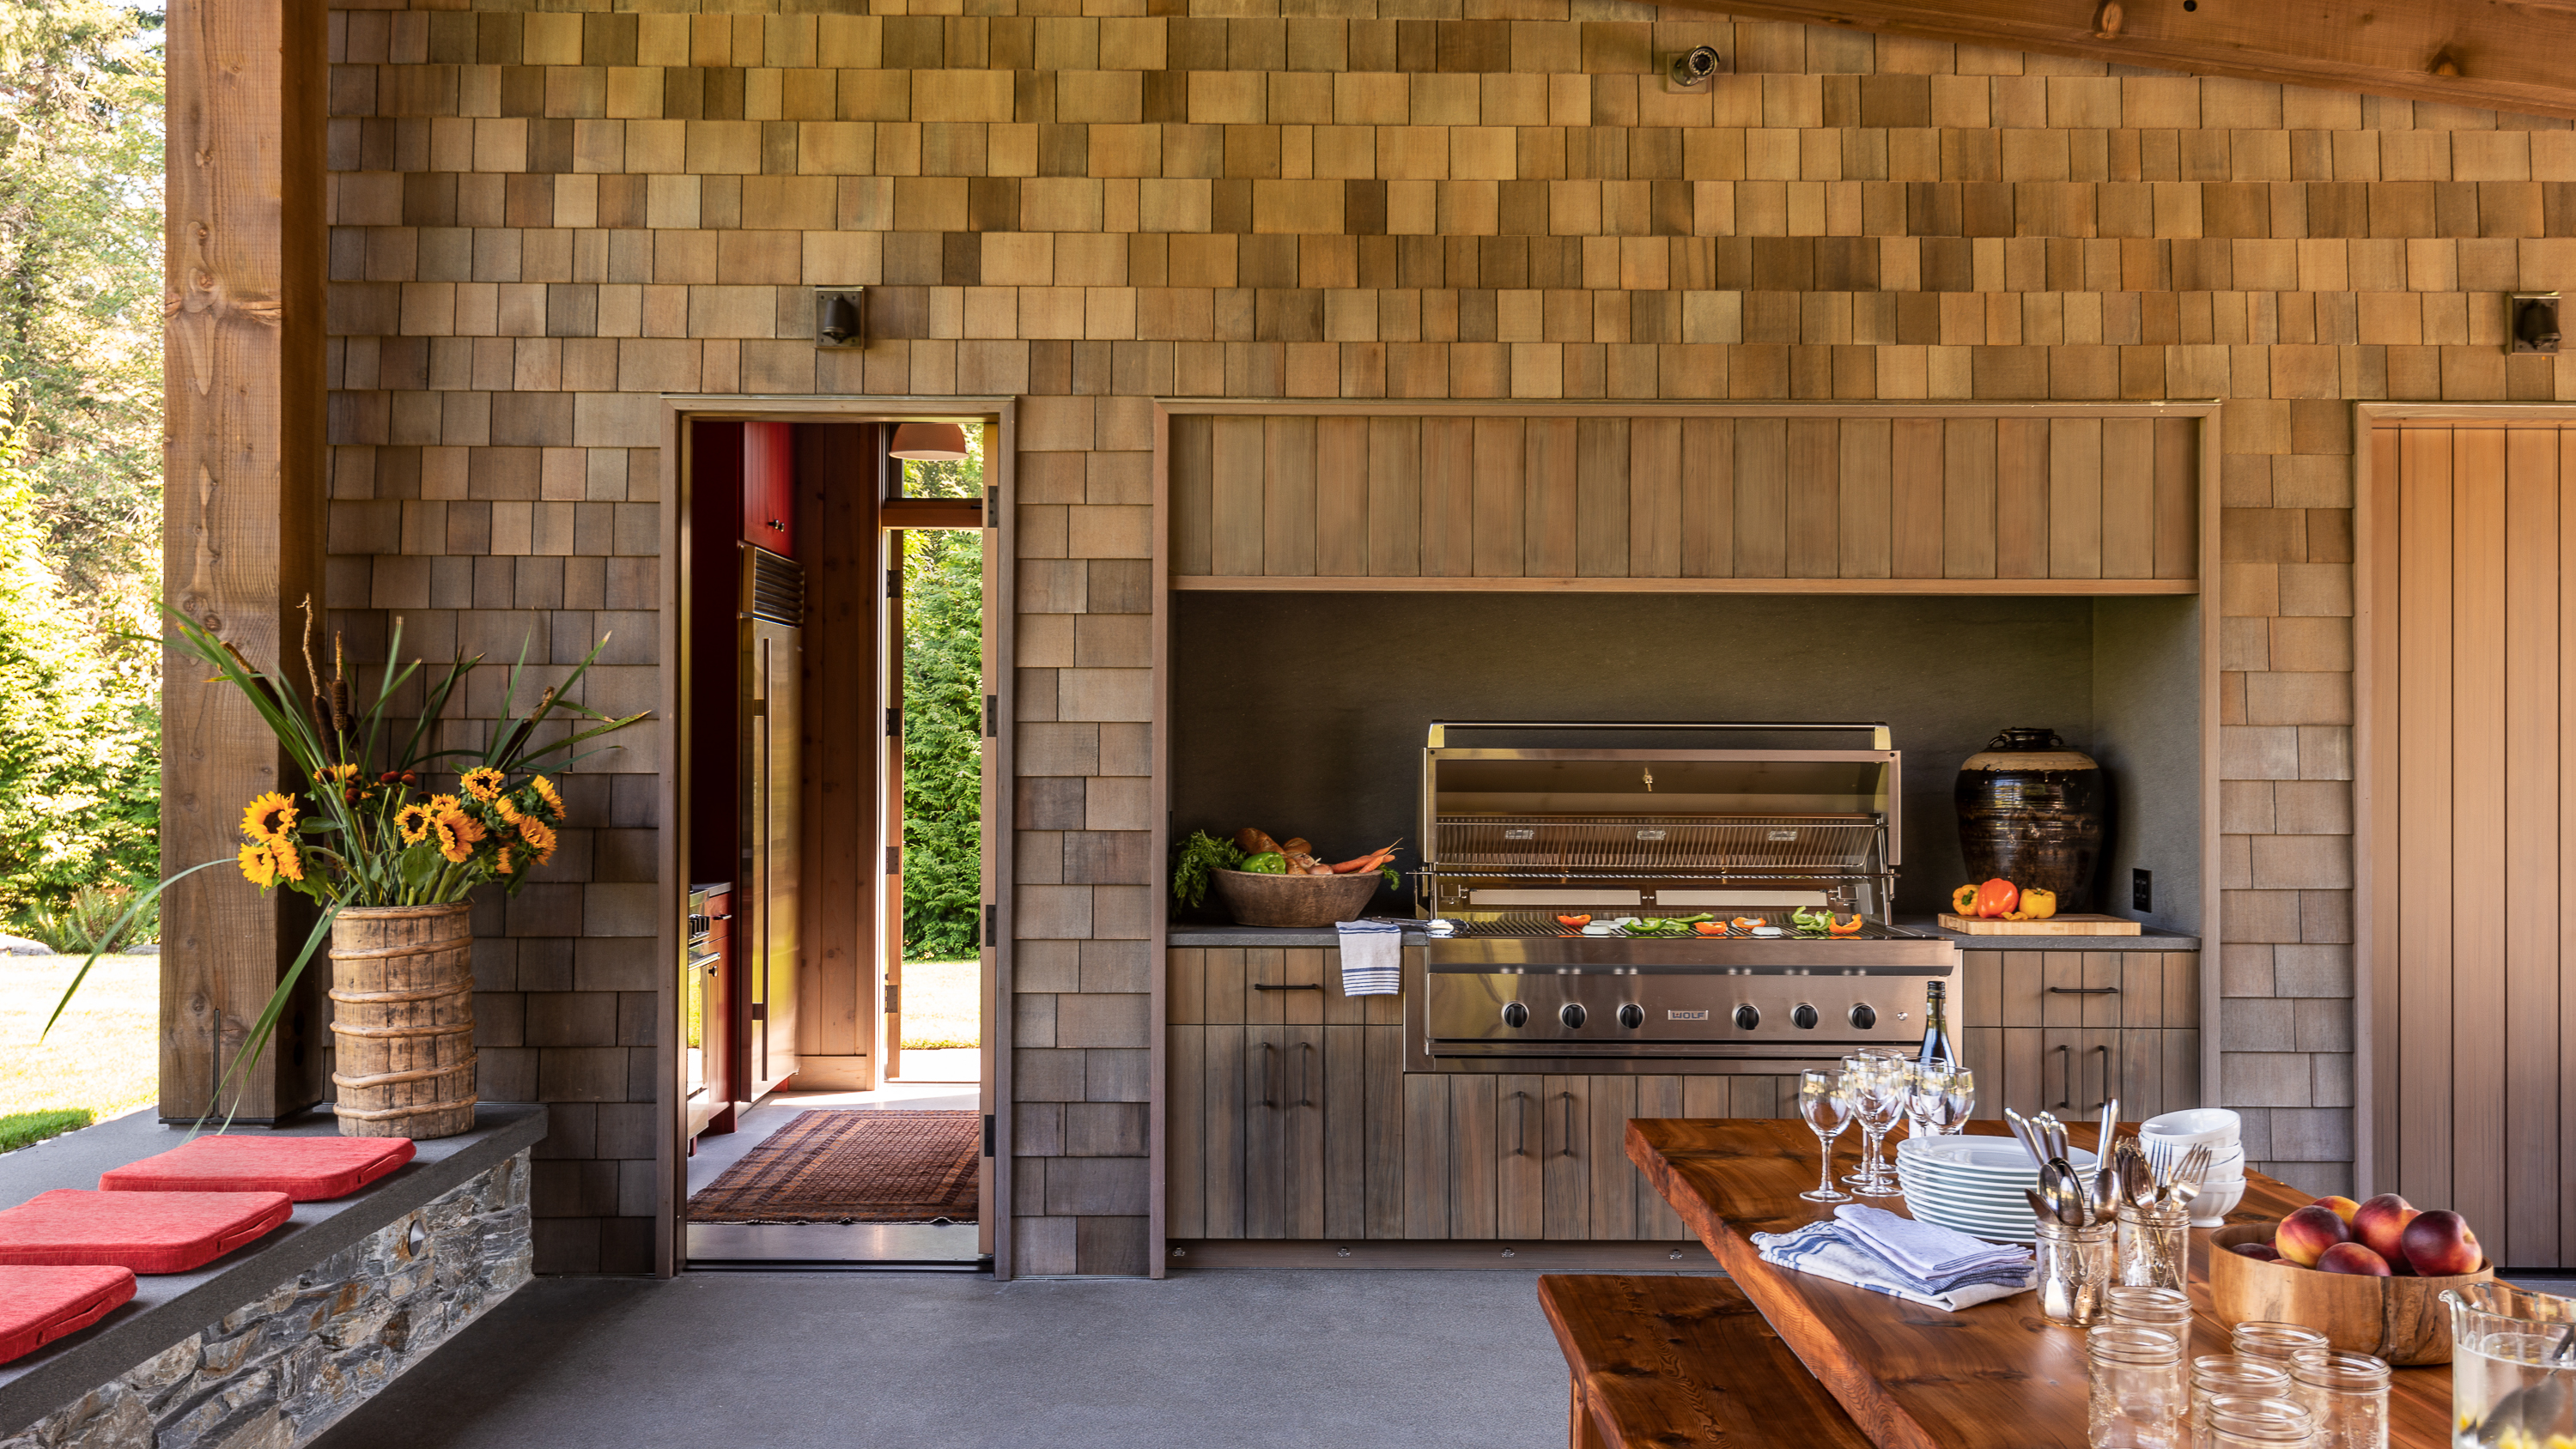 The OUtdoor kitchen at our Whidbey Island Field House features and oversize grill and concealed vent hood.